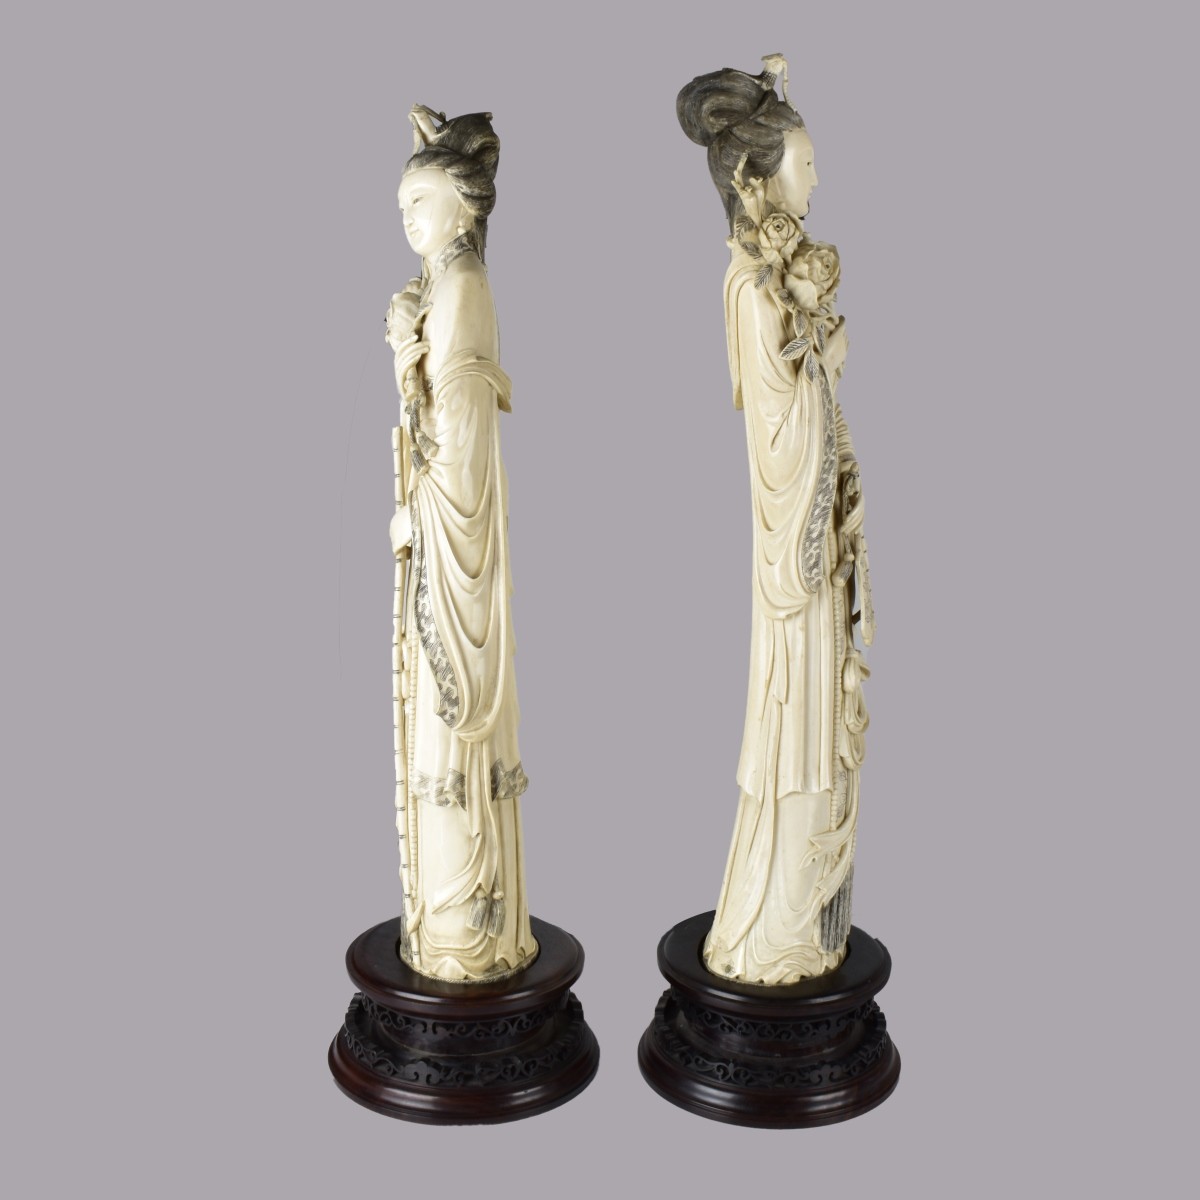 Pair of Large Chinese Tusk Figurines